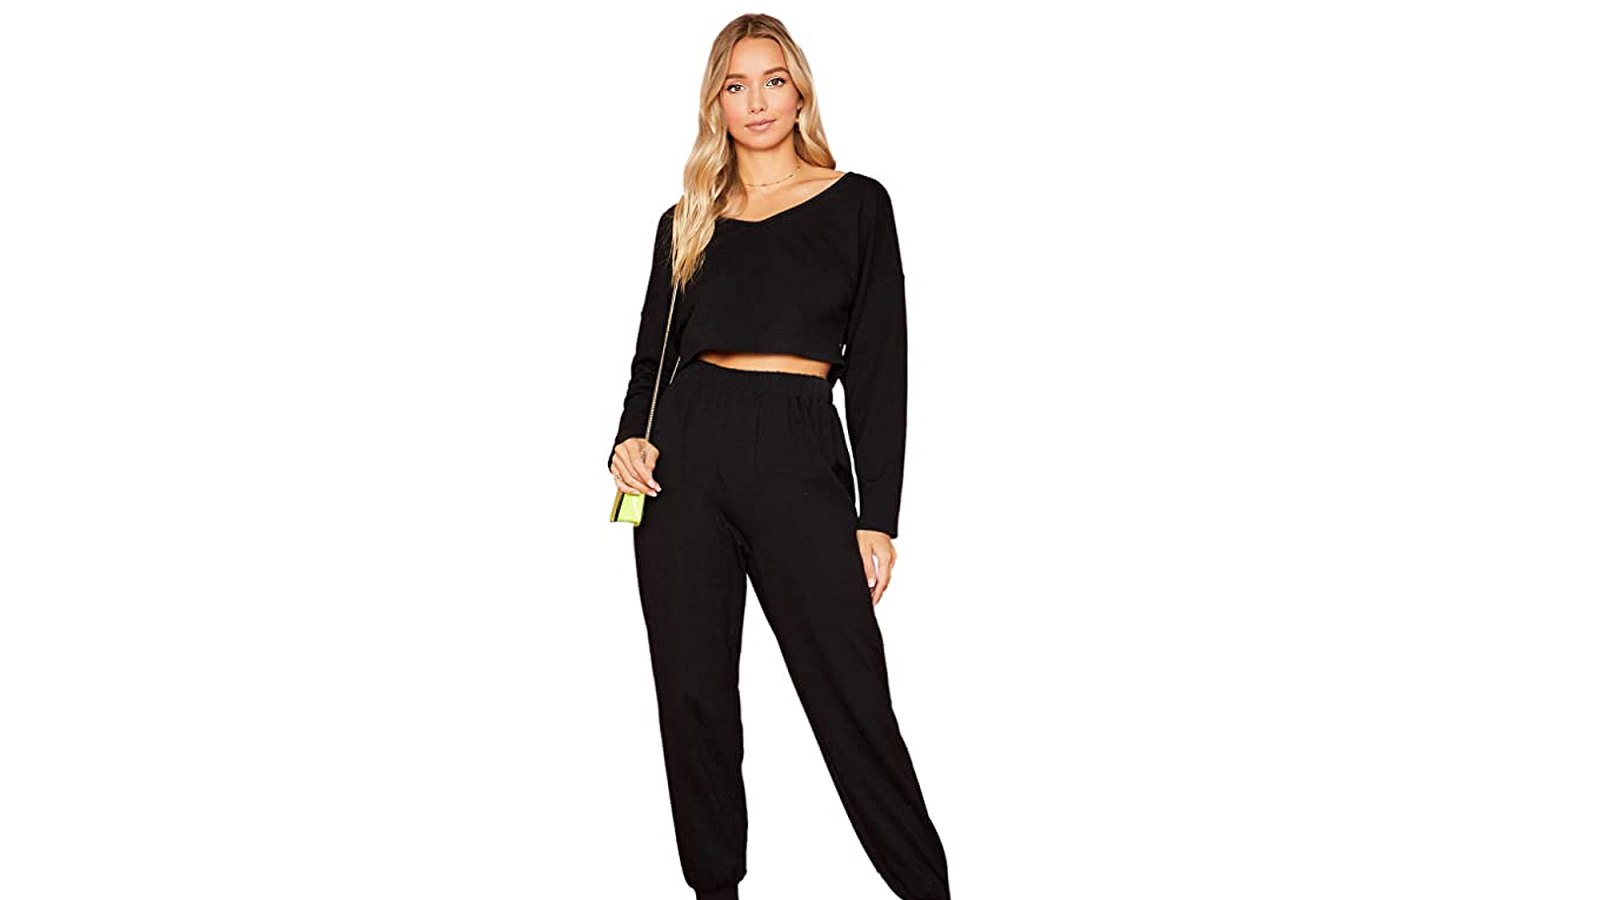 Just Dropped This Two-Piece Jogger Set — And I Plan to Live In It